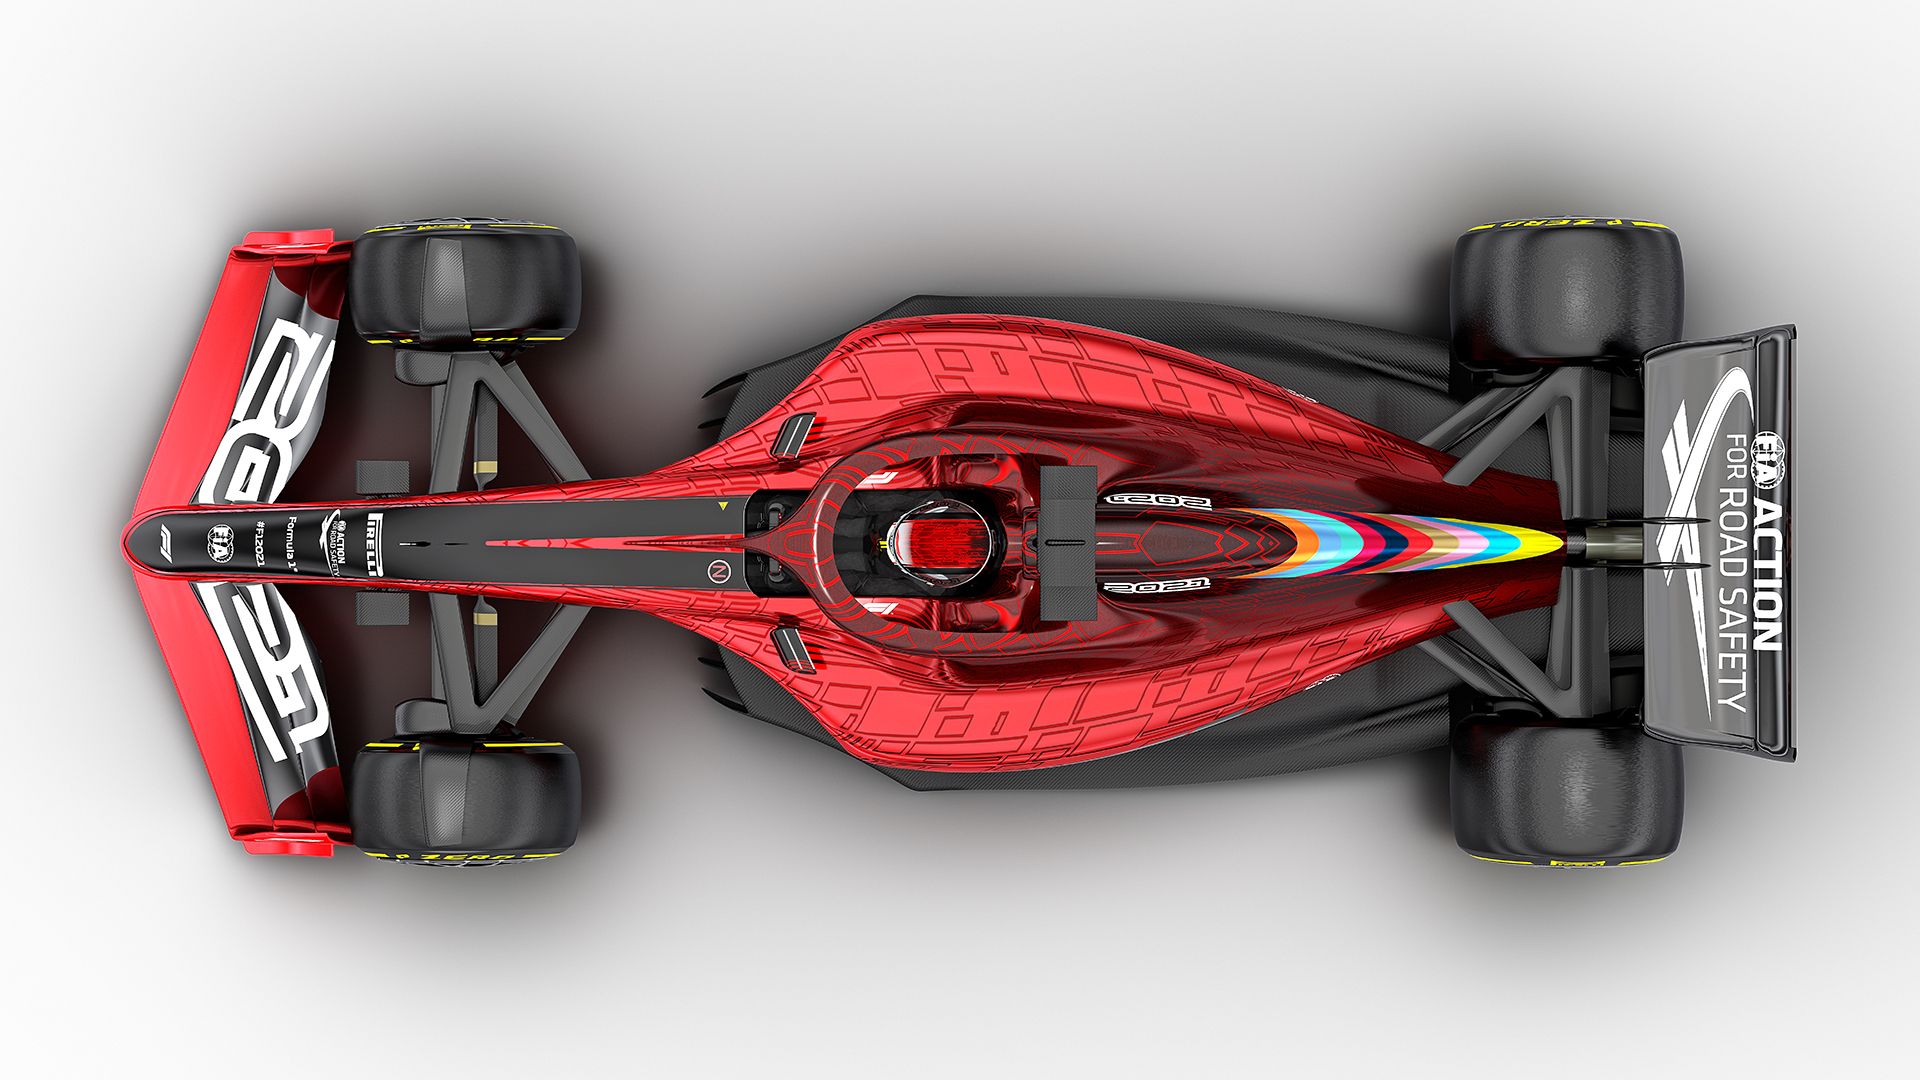 2021 F1 rules: Gallery of image of the 2021 F1 car